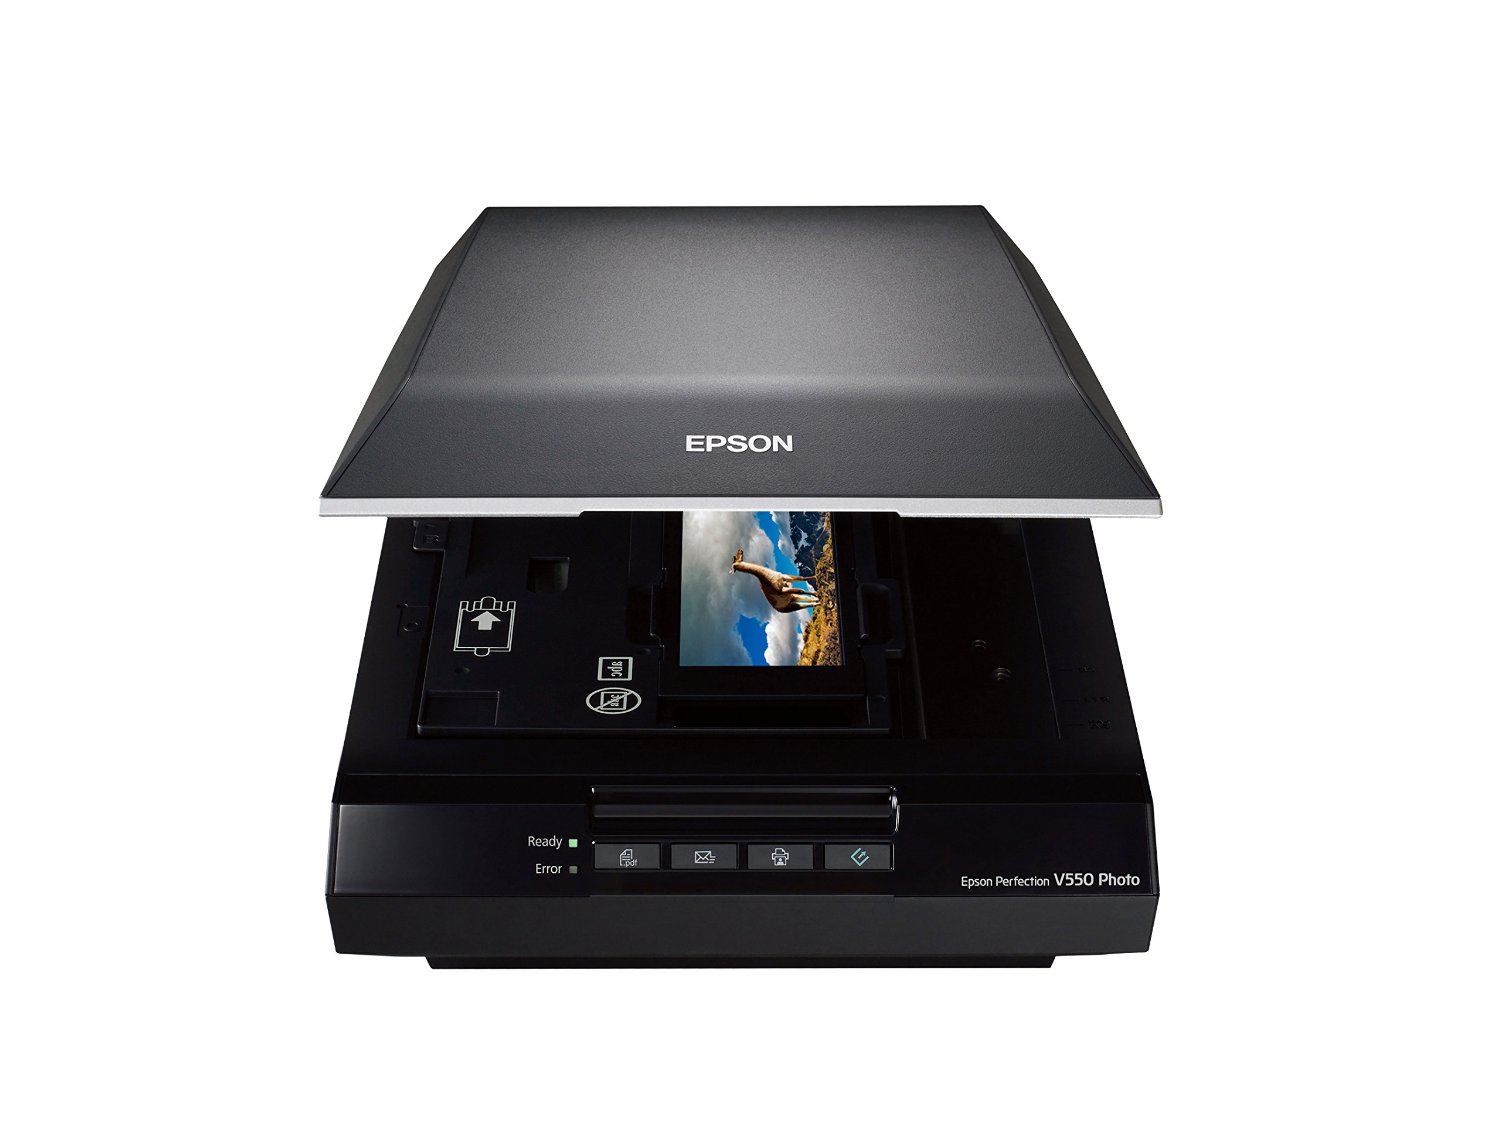 epson scanner software drivers